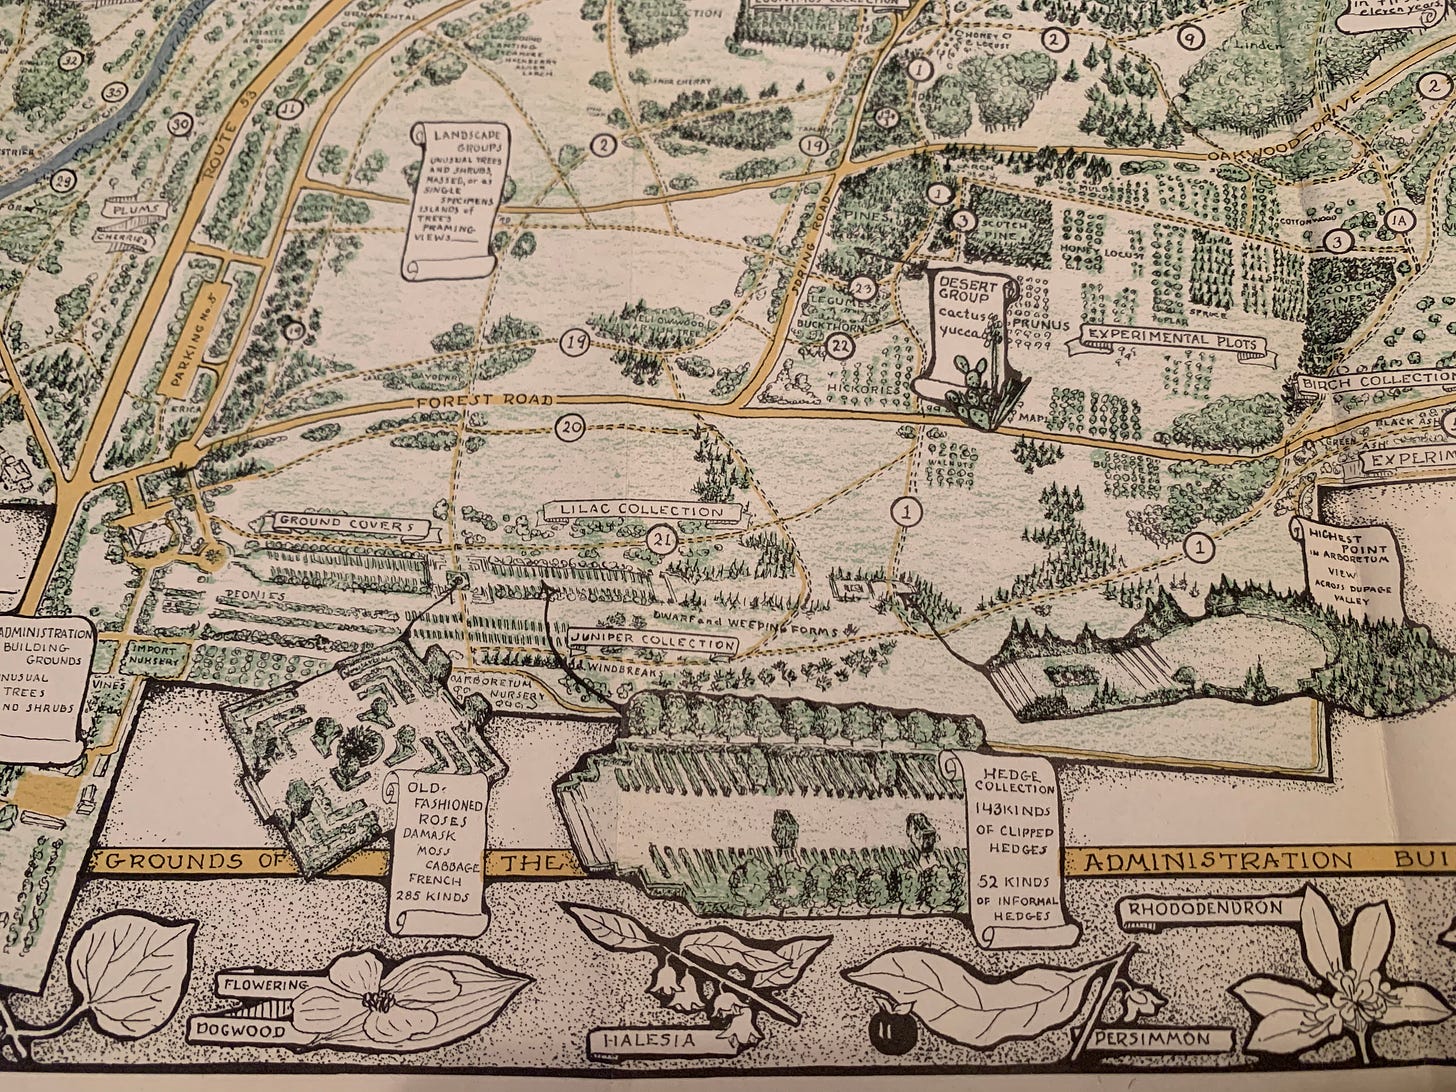 Inset of May Watts' Arboretum map, showing the near East side of the Arboretum, hedge collection, and steps without the four columns.